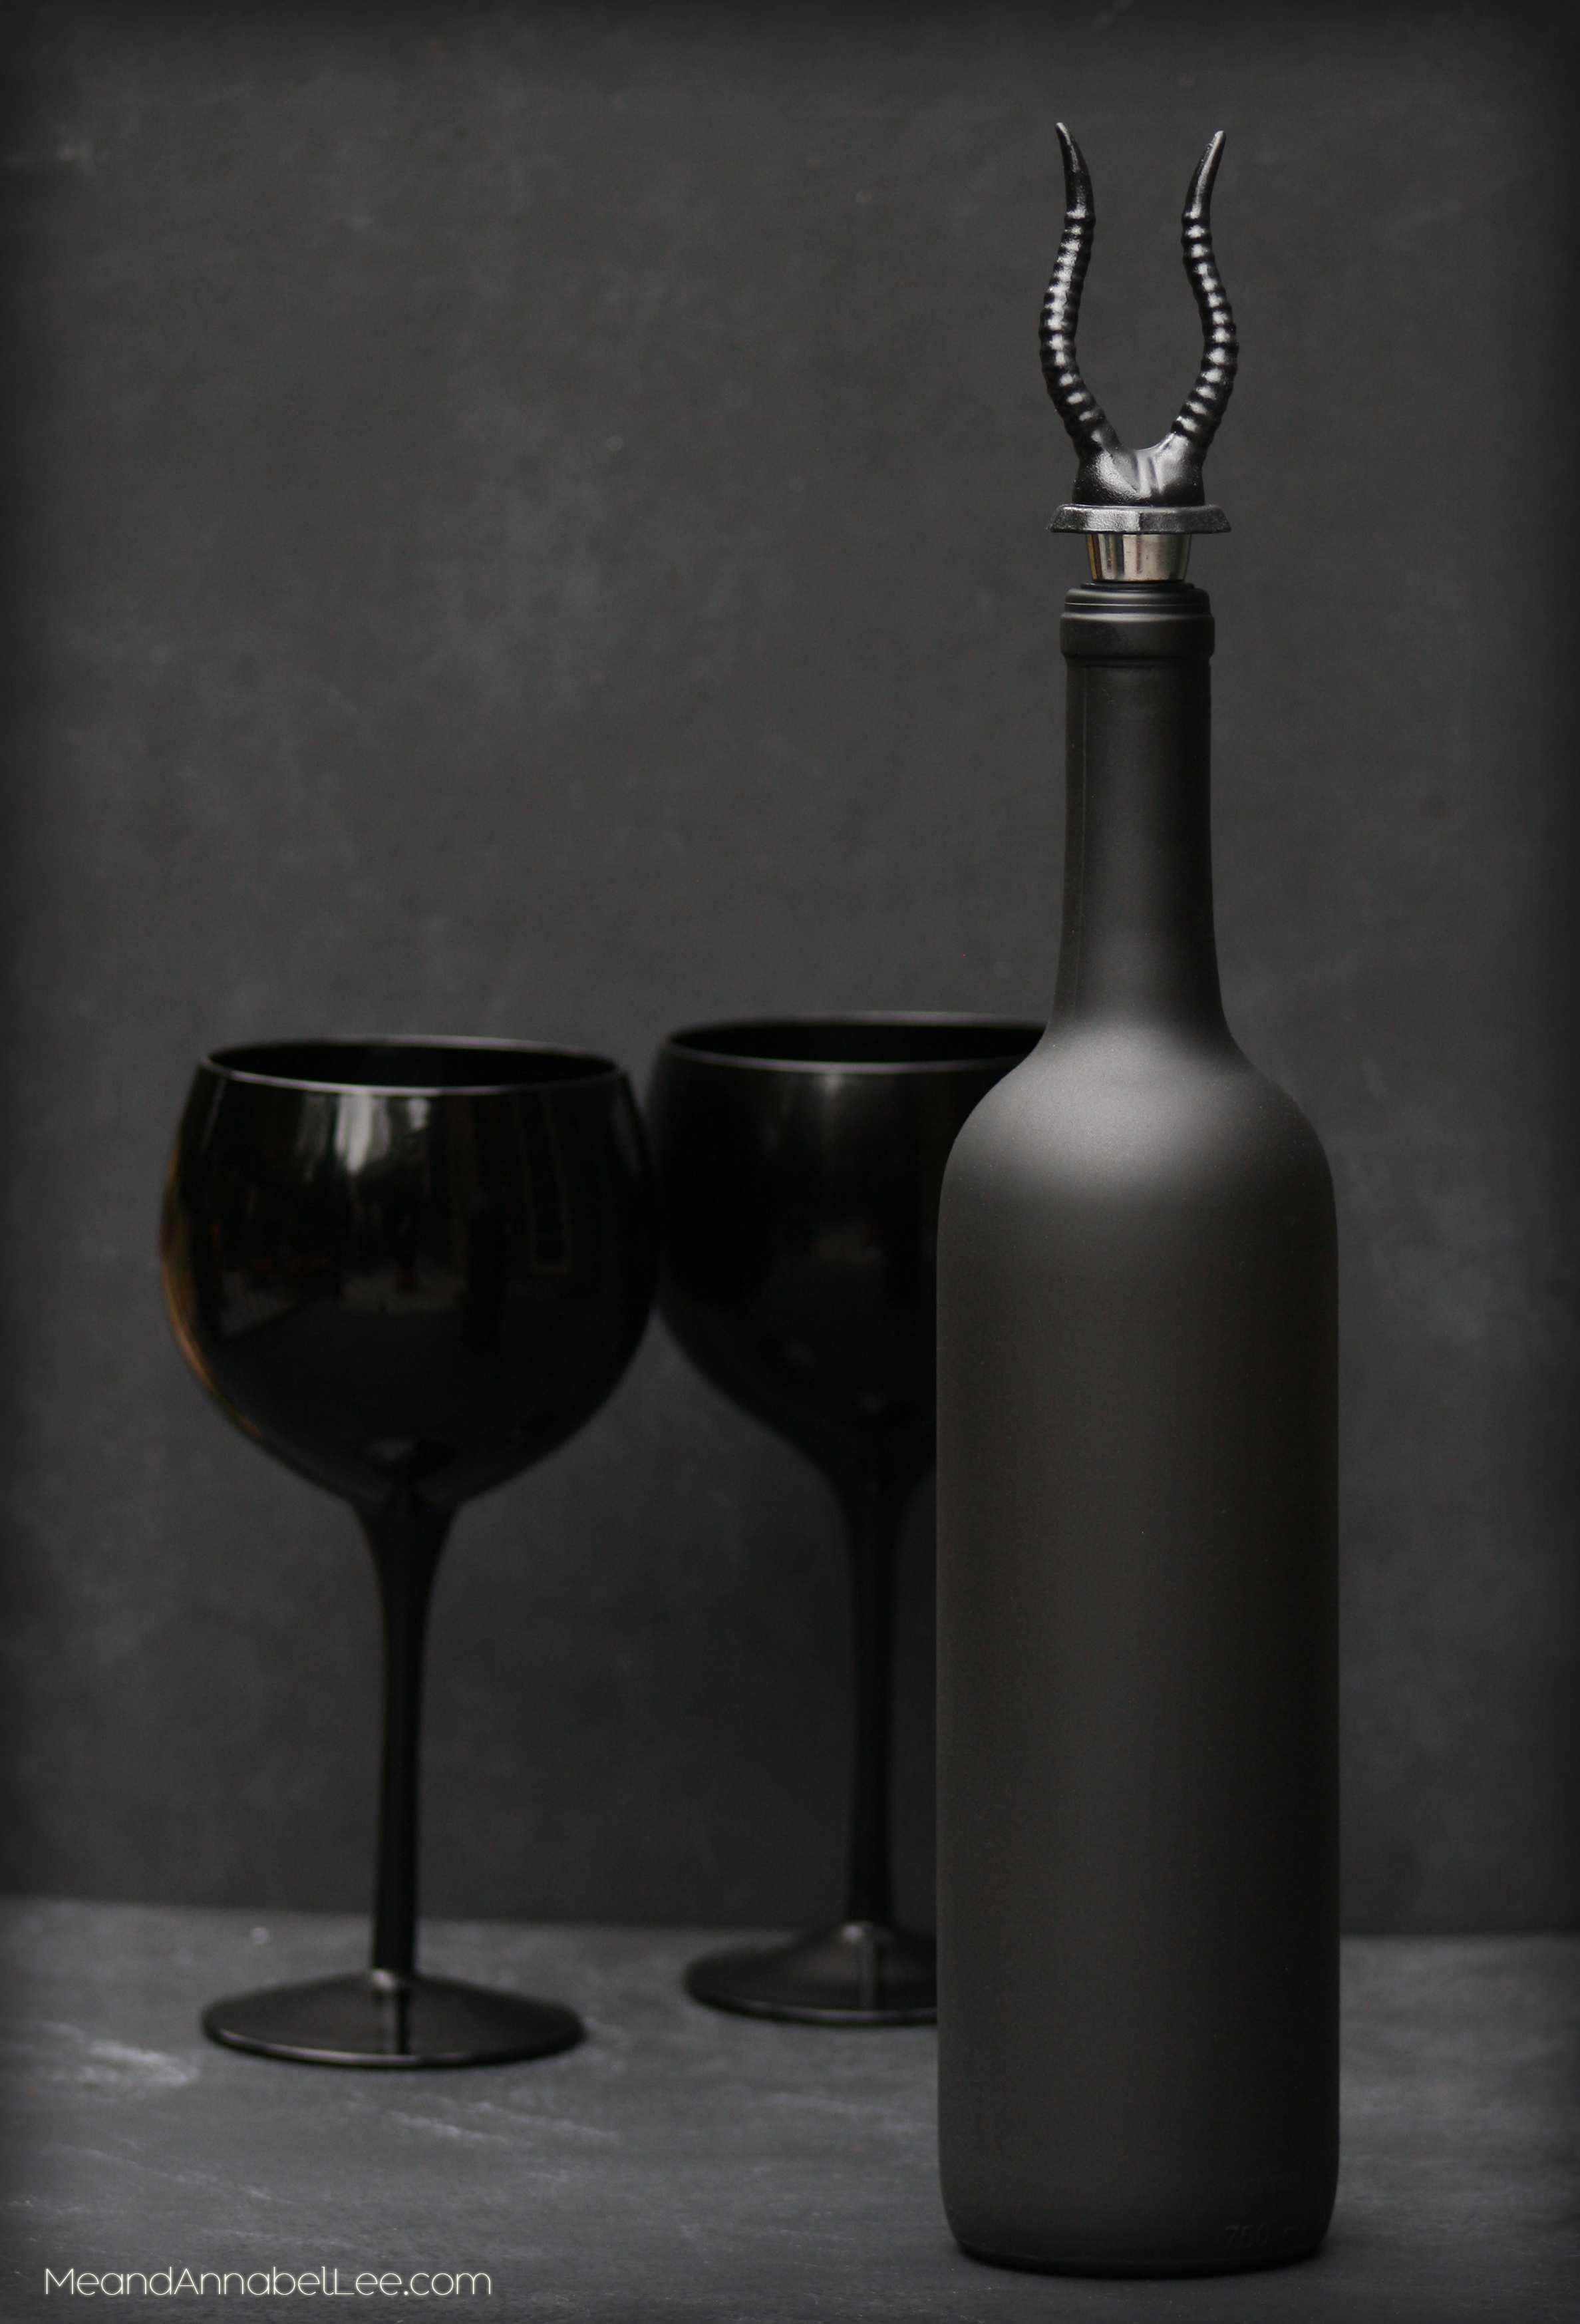 A Gothic Wine Bottle Stopper and Black Bottle - Black Horn Wine Stopper - Goth DIY - Goth It Yourself - www.MeandAnnabelLee.com